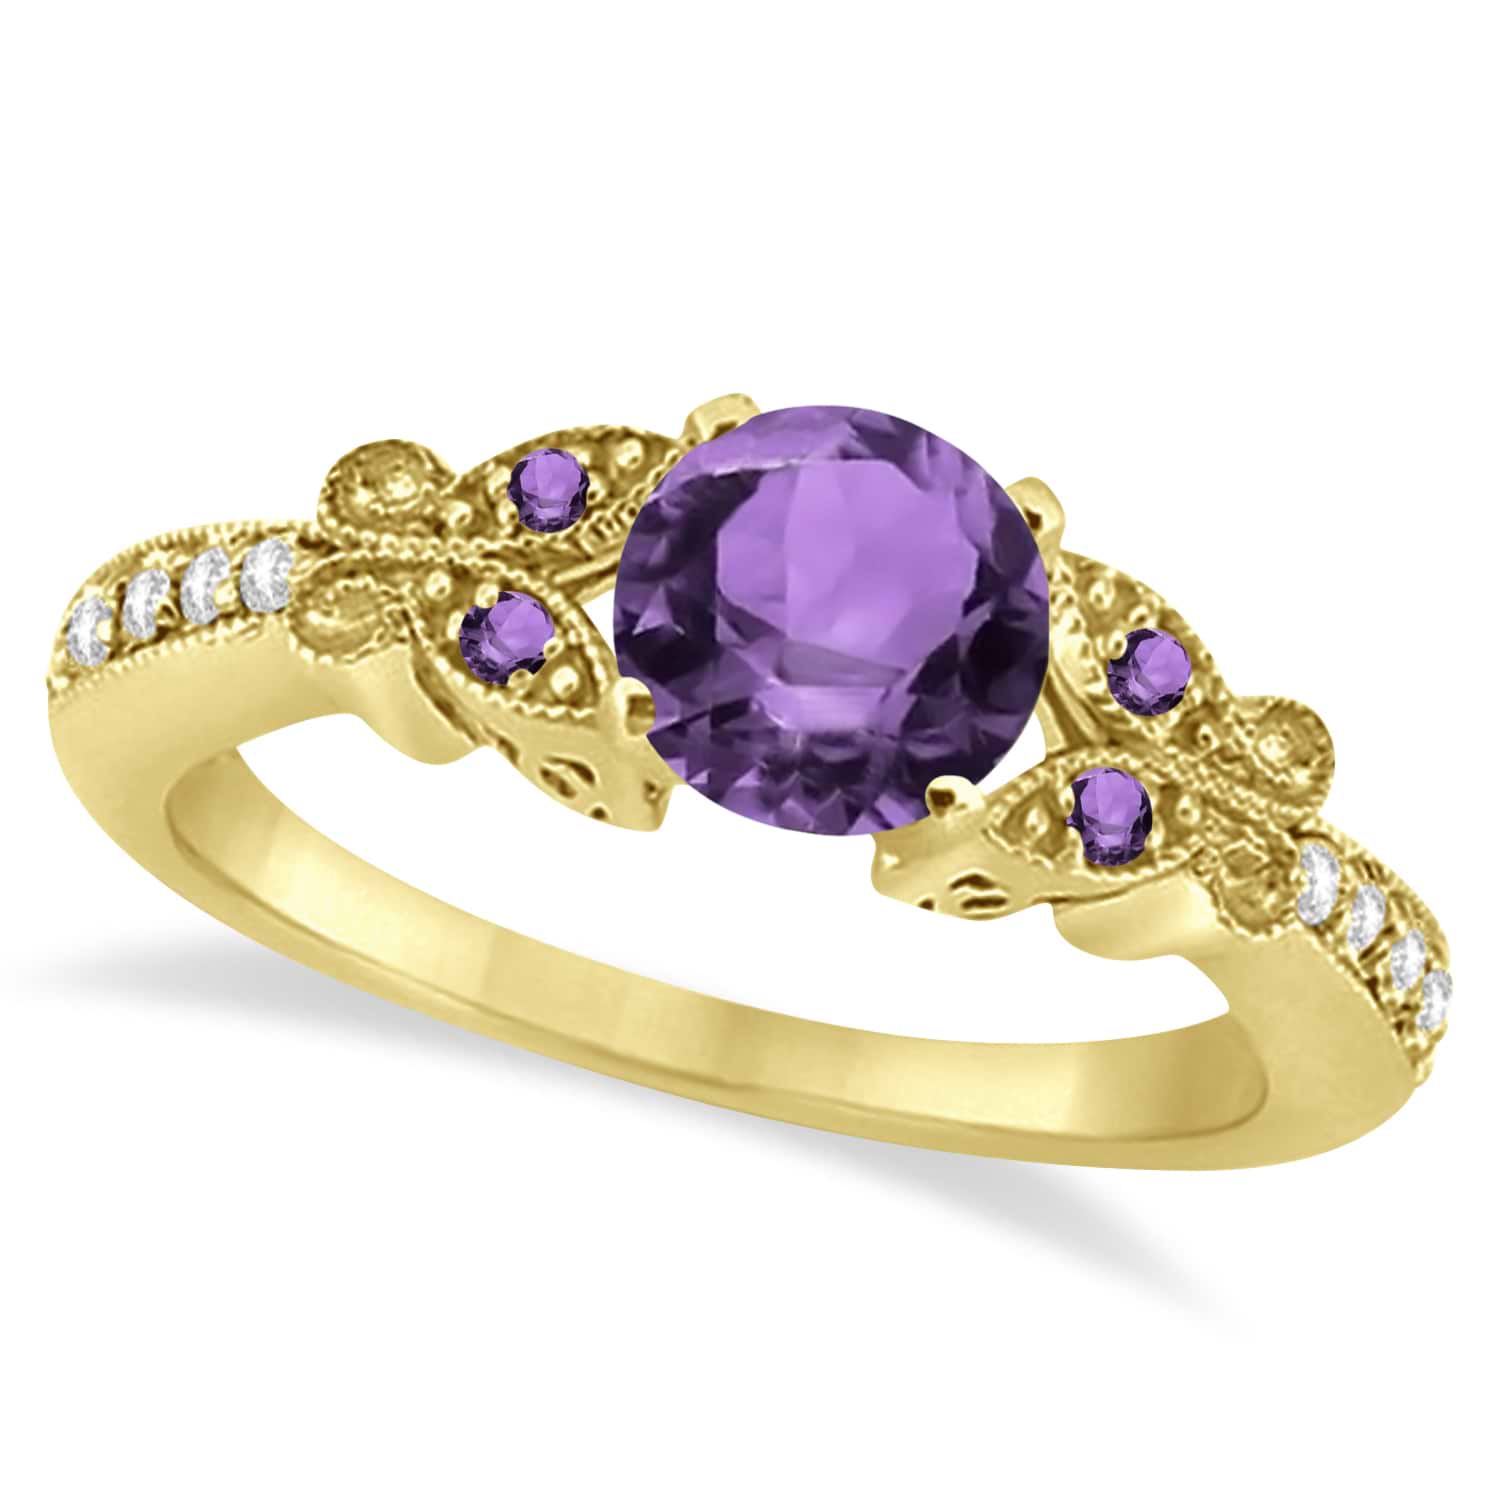 Butterfly Amethyst & Diamond Engagement Ring 14K Yellow Gold 0.88ctw